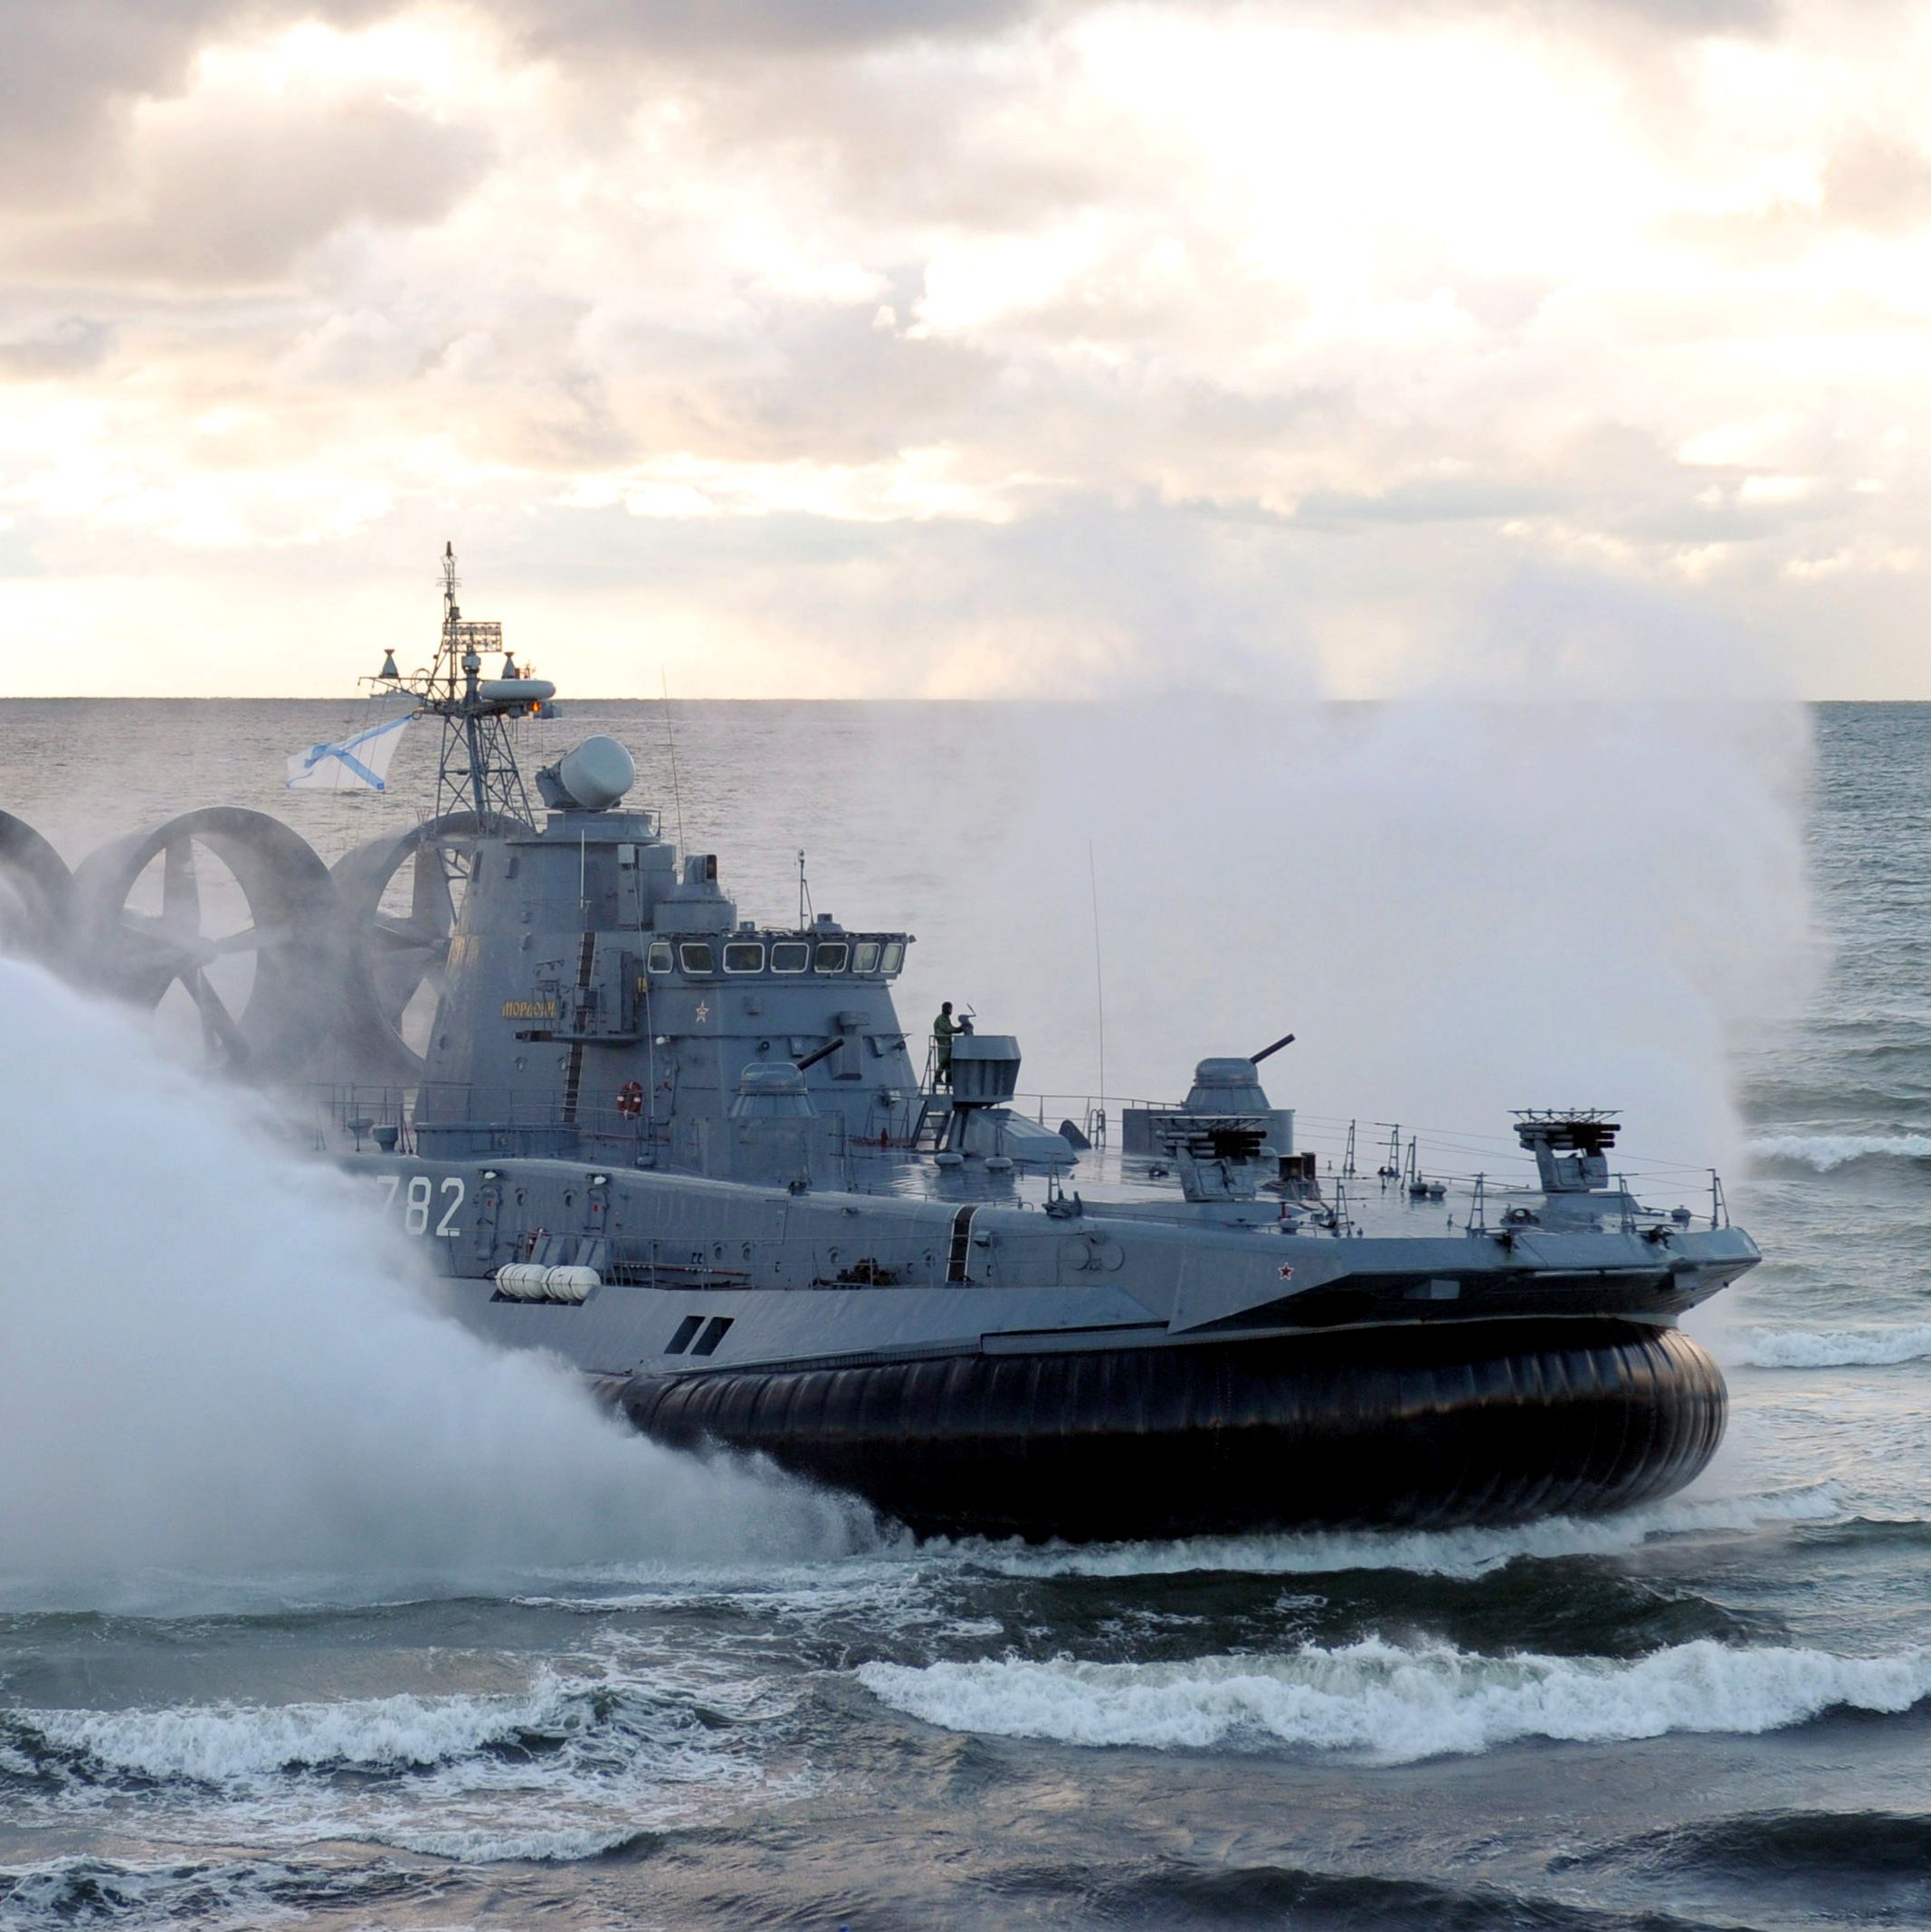 China Is Building Its Own Hovercraft, Meaning It Probably Got Its Hands on Soviet Blueprints